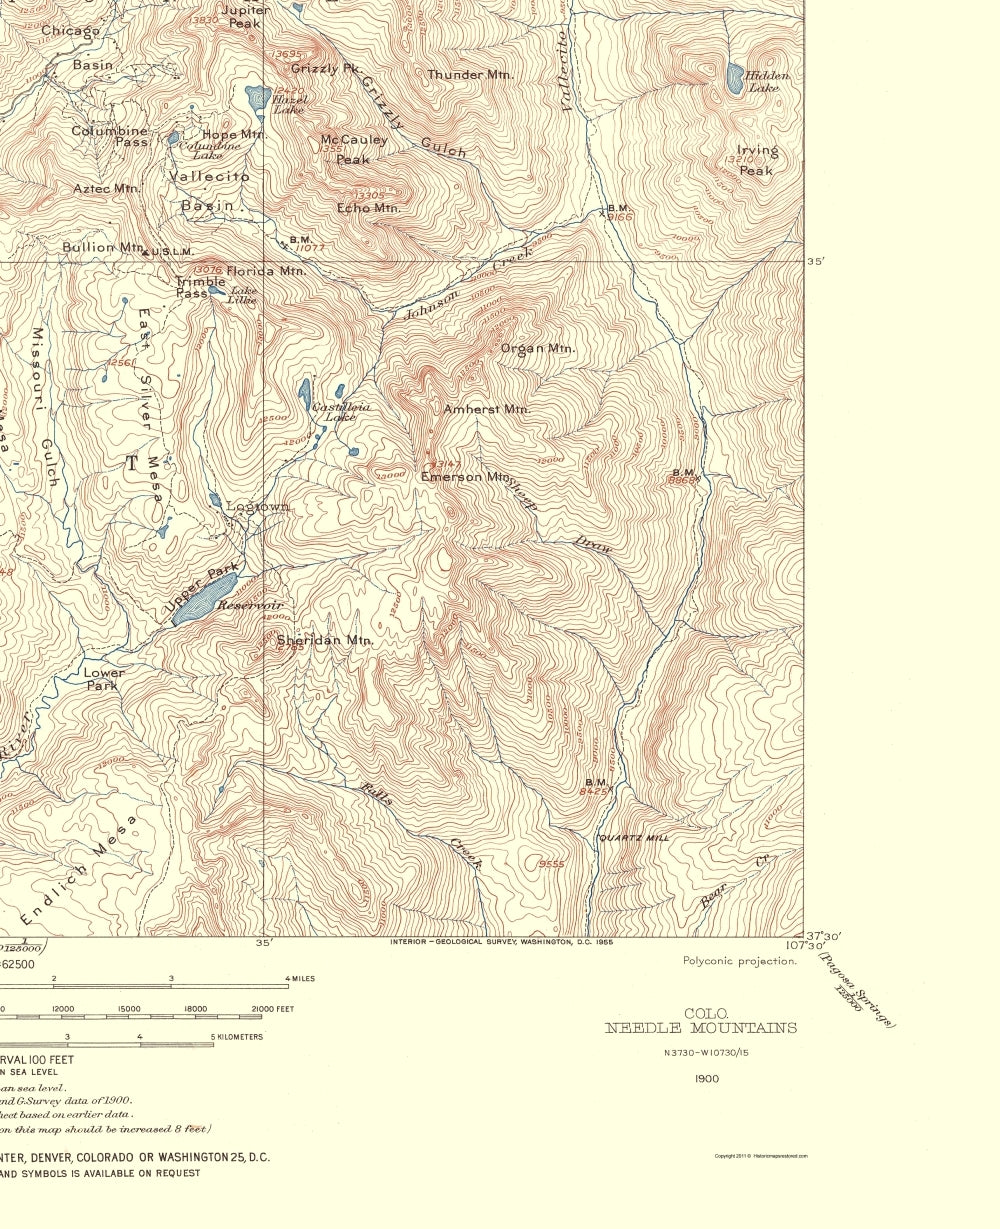 Topographical Map - Needle Mountains Colorado Quad - USGS 1955 - 23 x 28.27 - Vintage Wall Art